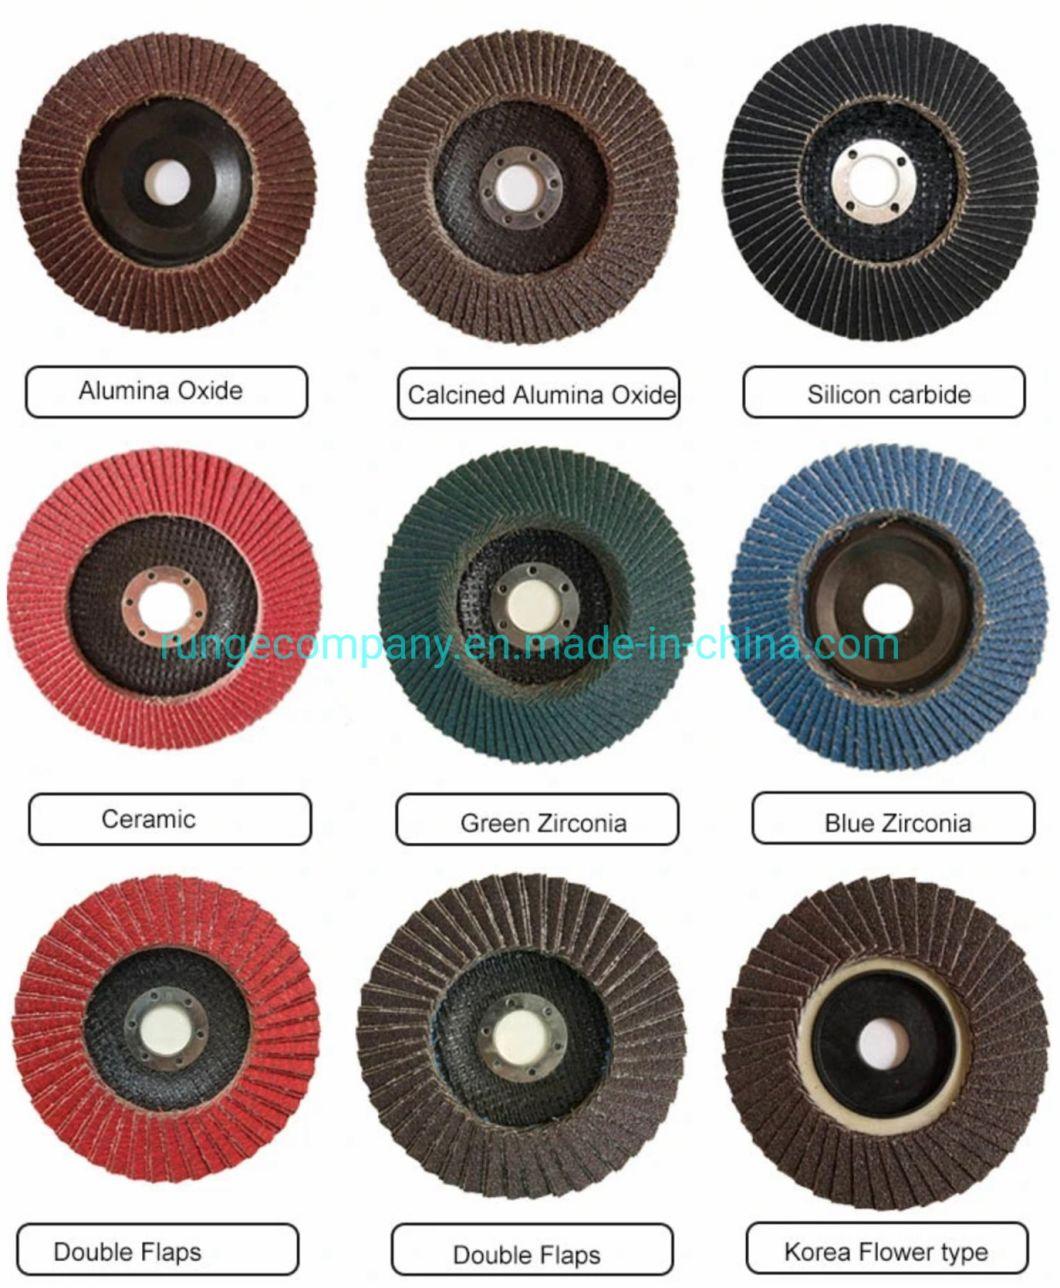 Power Electric Tools Accessories Abrasive Cutting Disc Wheels 14" Ultra Thin Metal & Stainless Steel for Asia Market